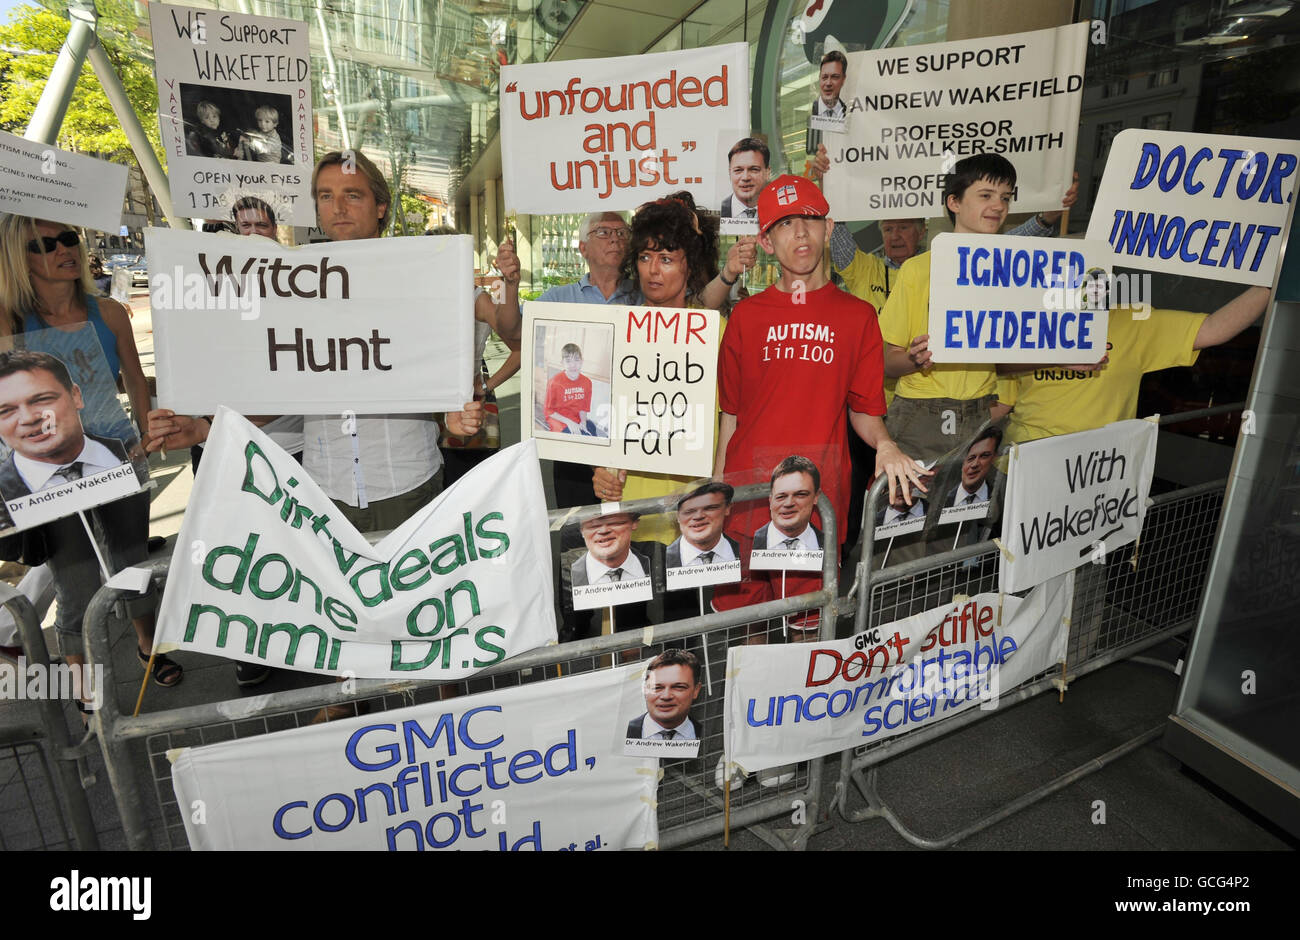 Supporters of Dr Andrew Wakefield, the doctor at the centre of the MMR scandal, outside the GMC in London. Stock Photo